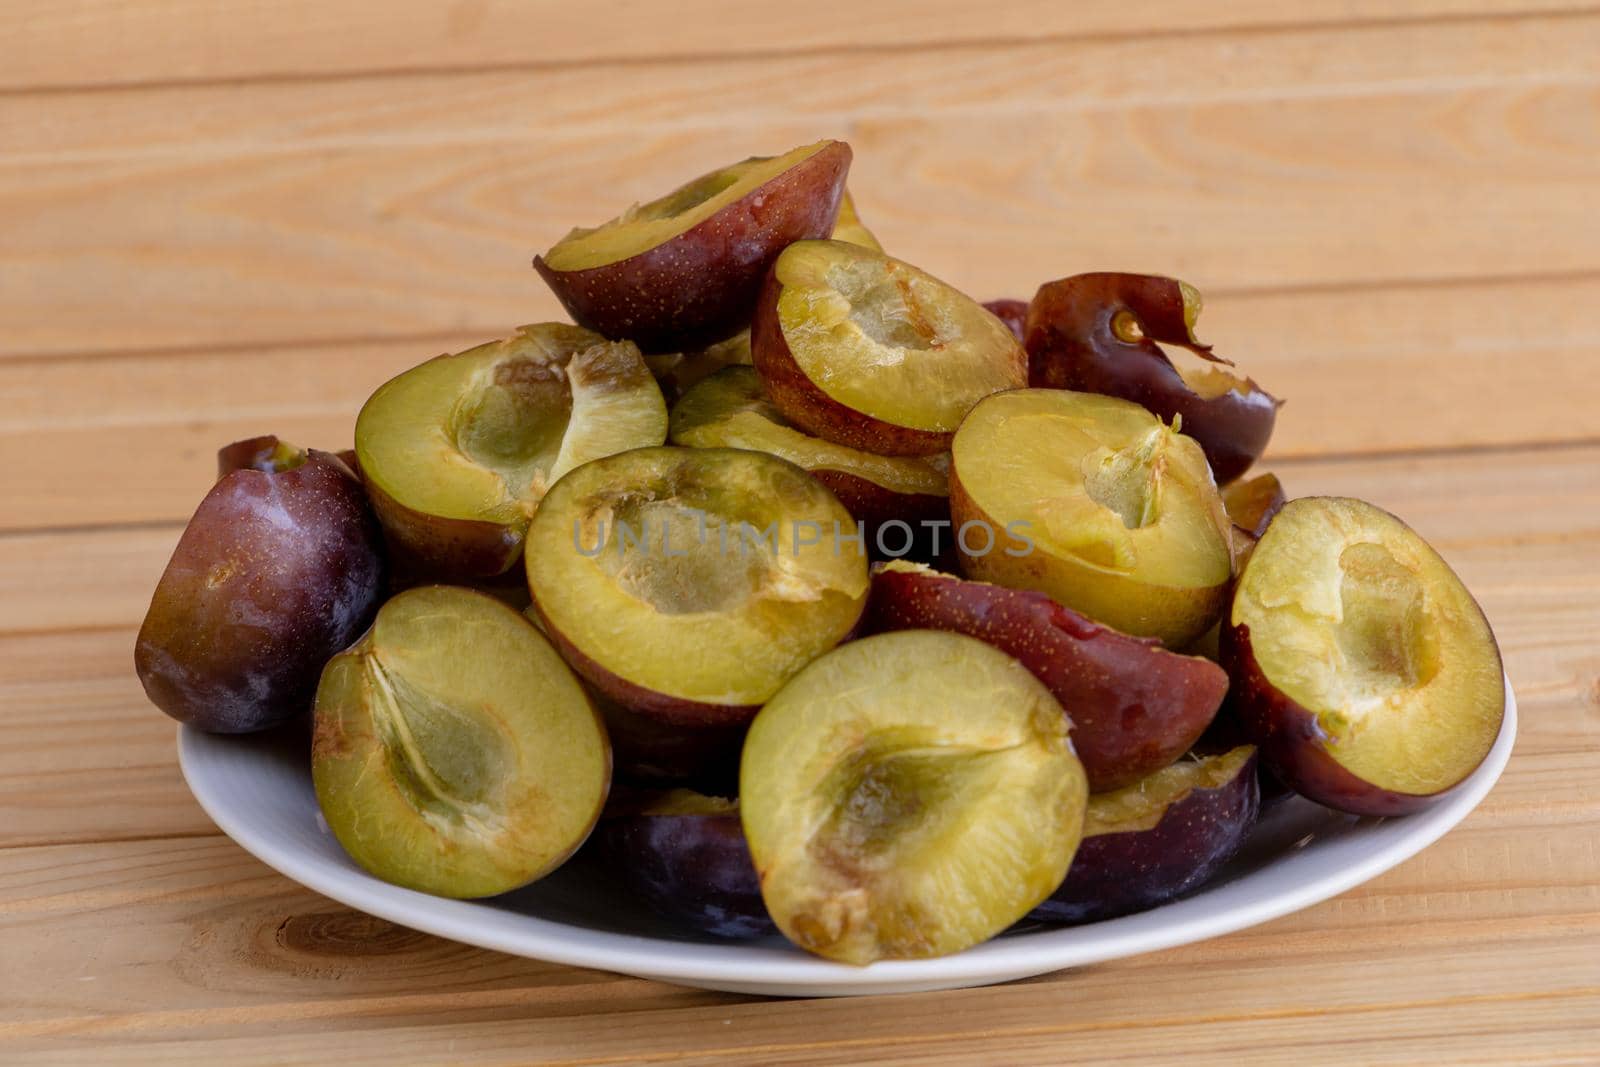 A plate full of tasty and juicy plums.